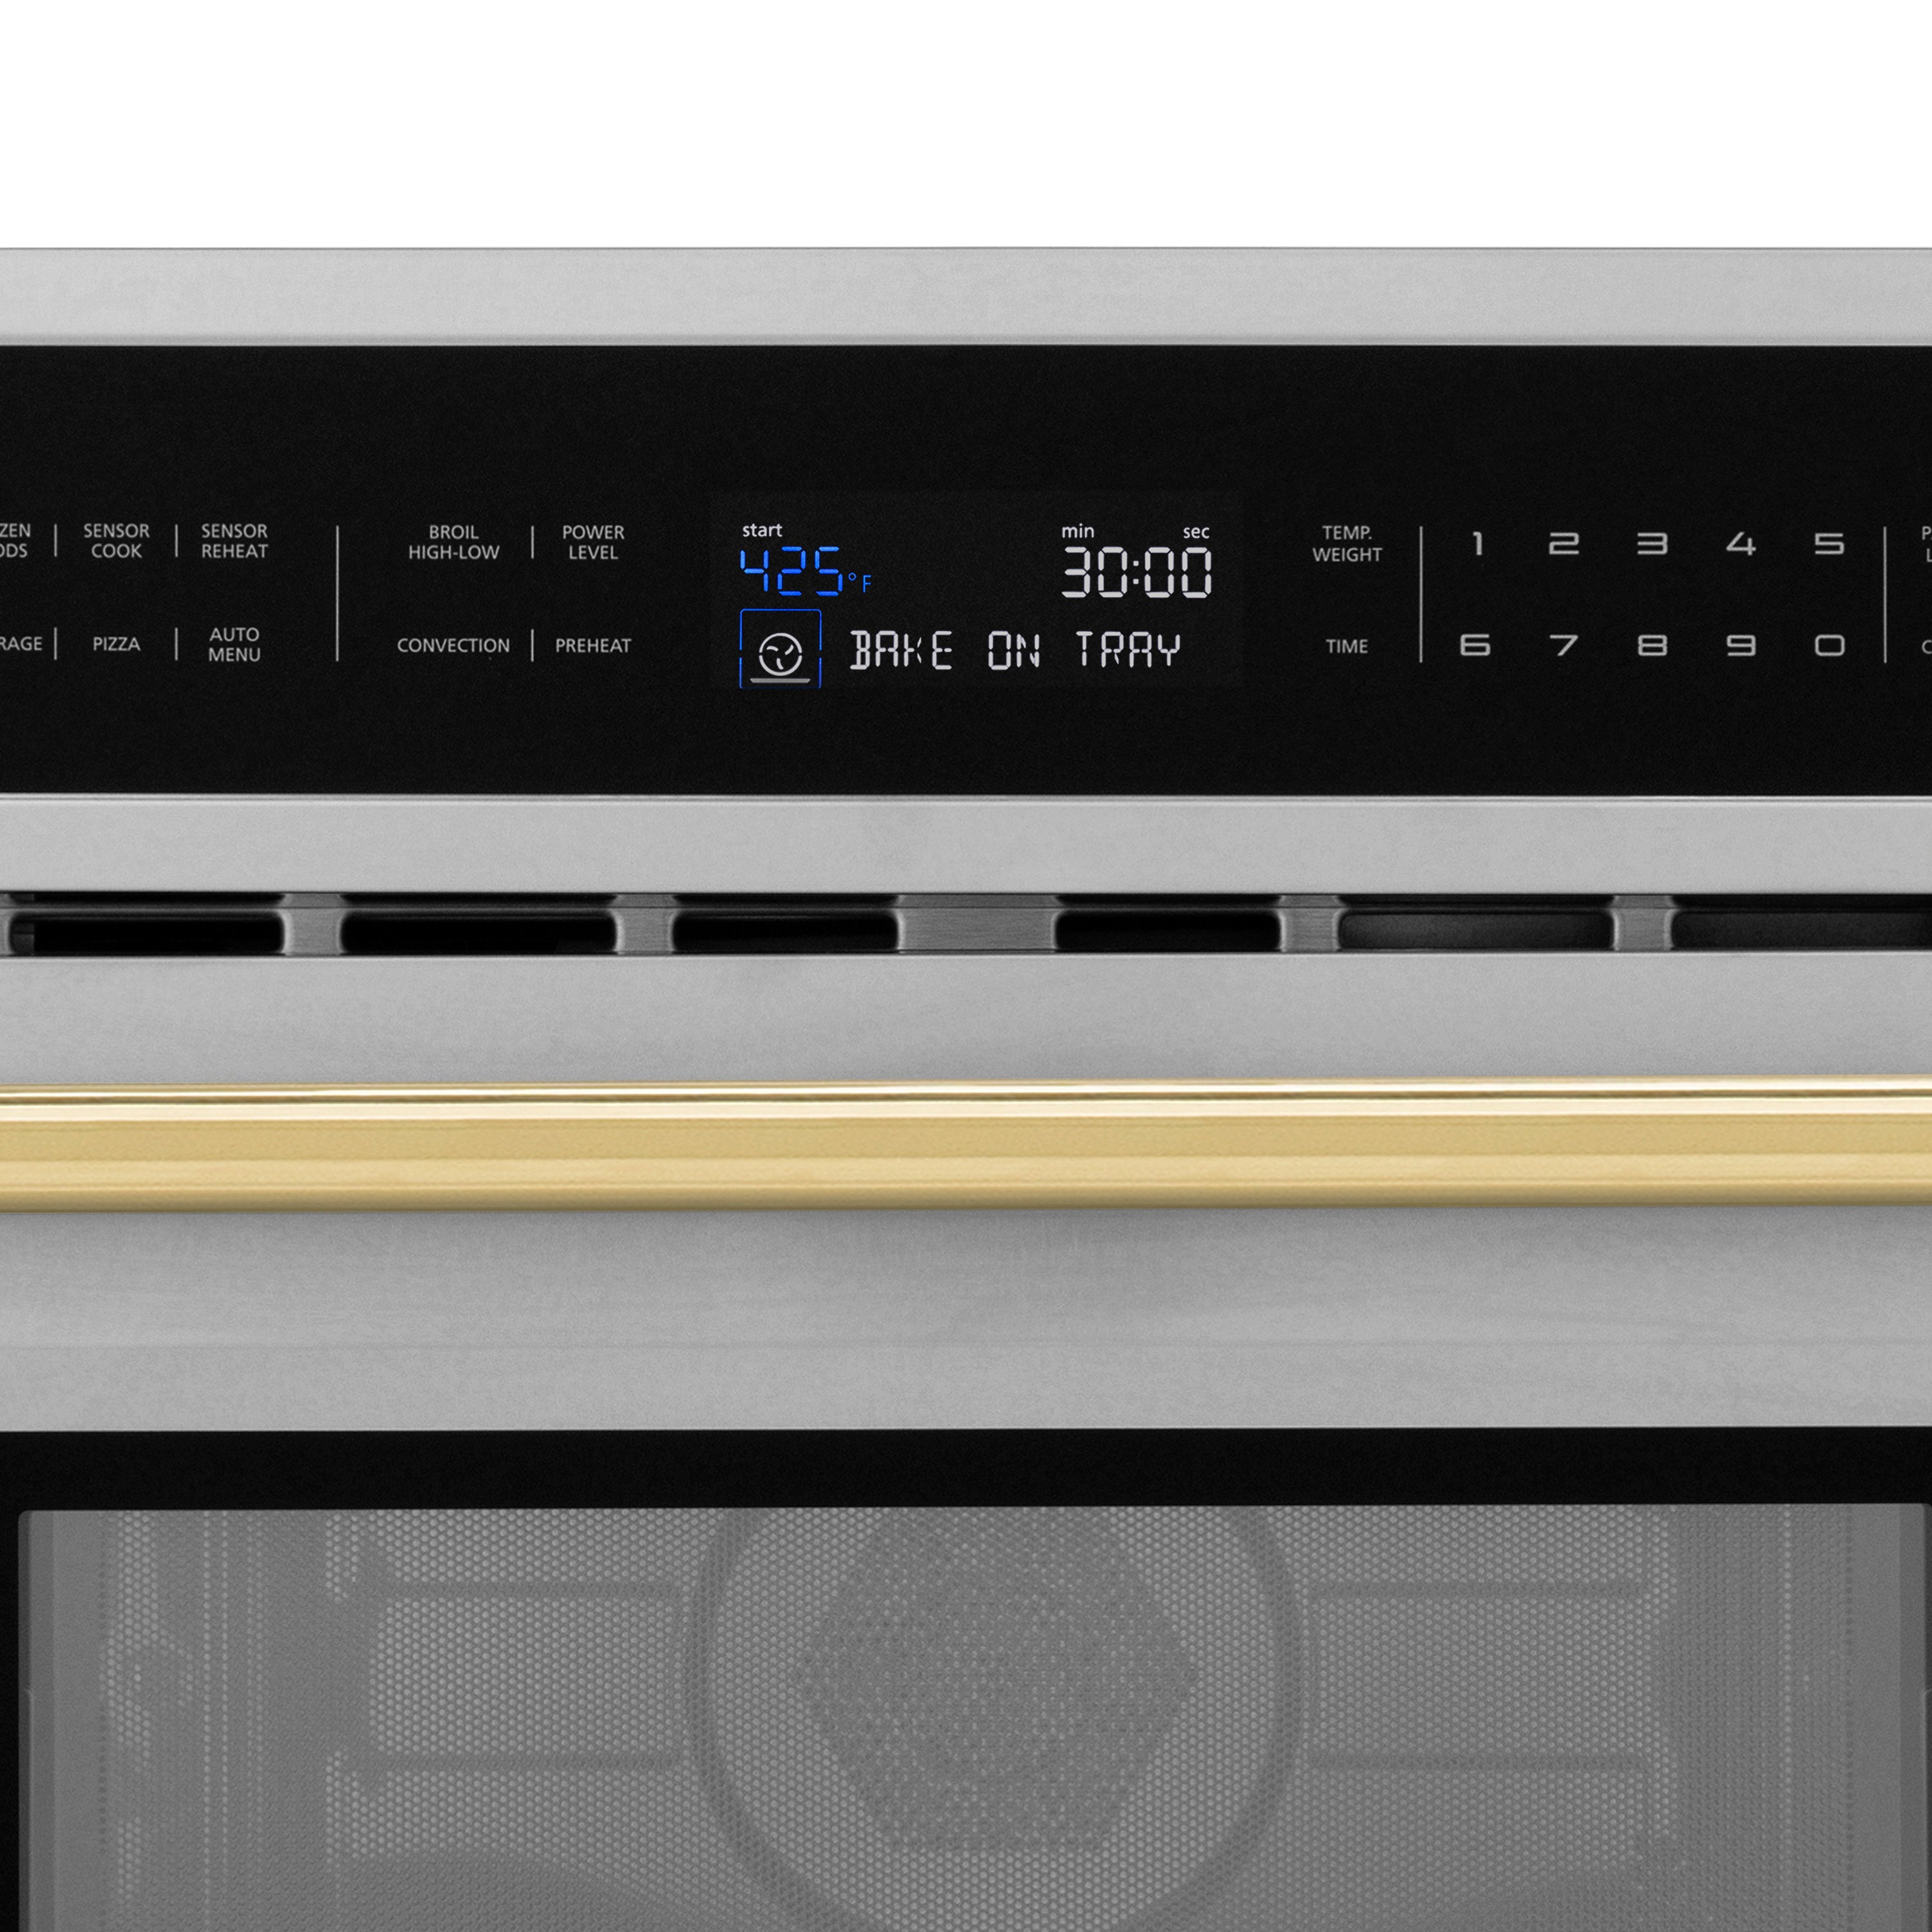 ZLINE Autograph Edition 30” 1.6 cu ft. Built-in Convection Microwave Oven in Stainless Steel and Polished Gold Accents (MWOZ-30-G)